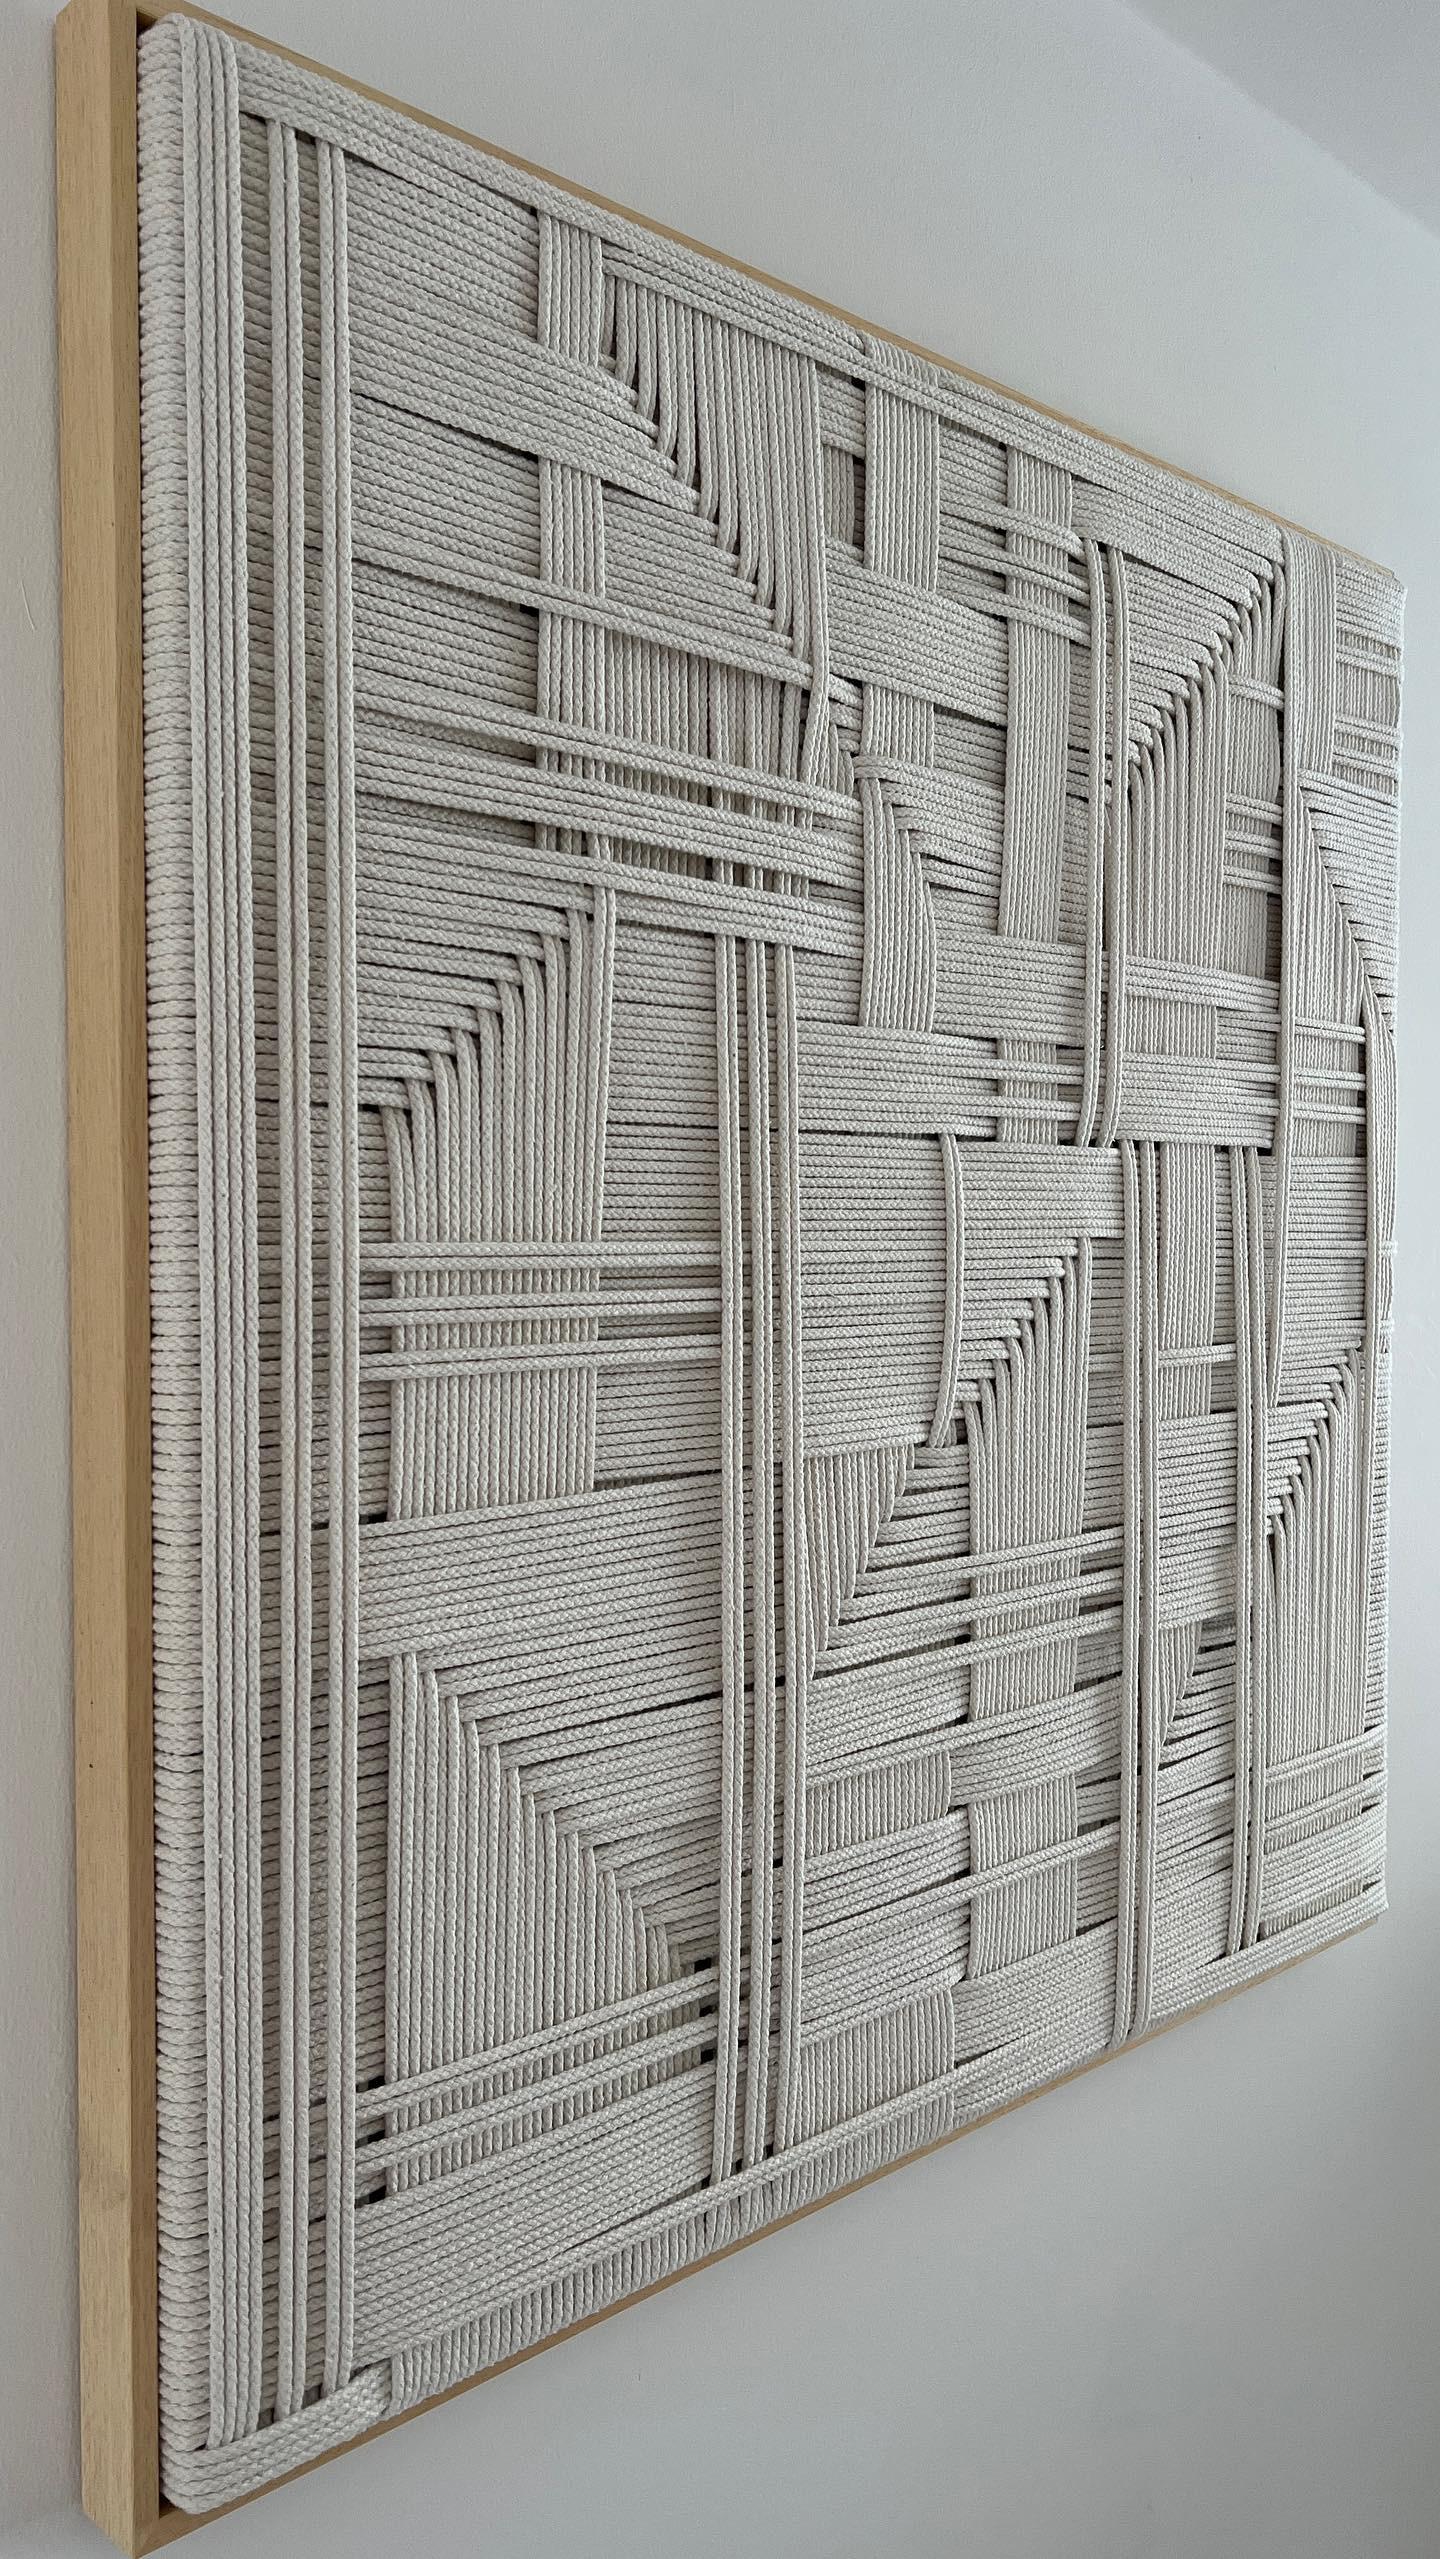 Figurative
Textile Art, Cotton, Handmade
Free style weaving
80x80cm
Commission piece 

About the artist

Matthias De Vogel

The Textile art studio Fault Lines is Founded in 2015 by Matthias de Vogel. Matthias lived and worked for several years in